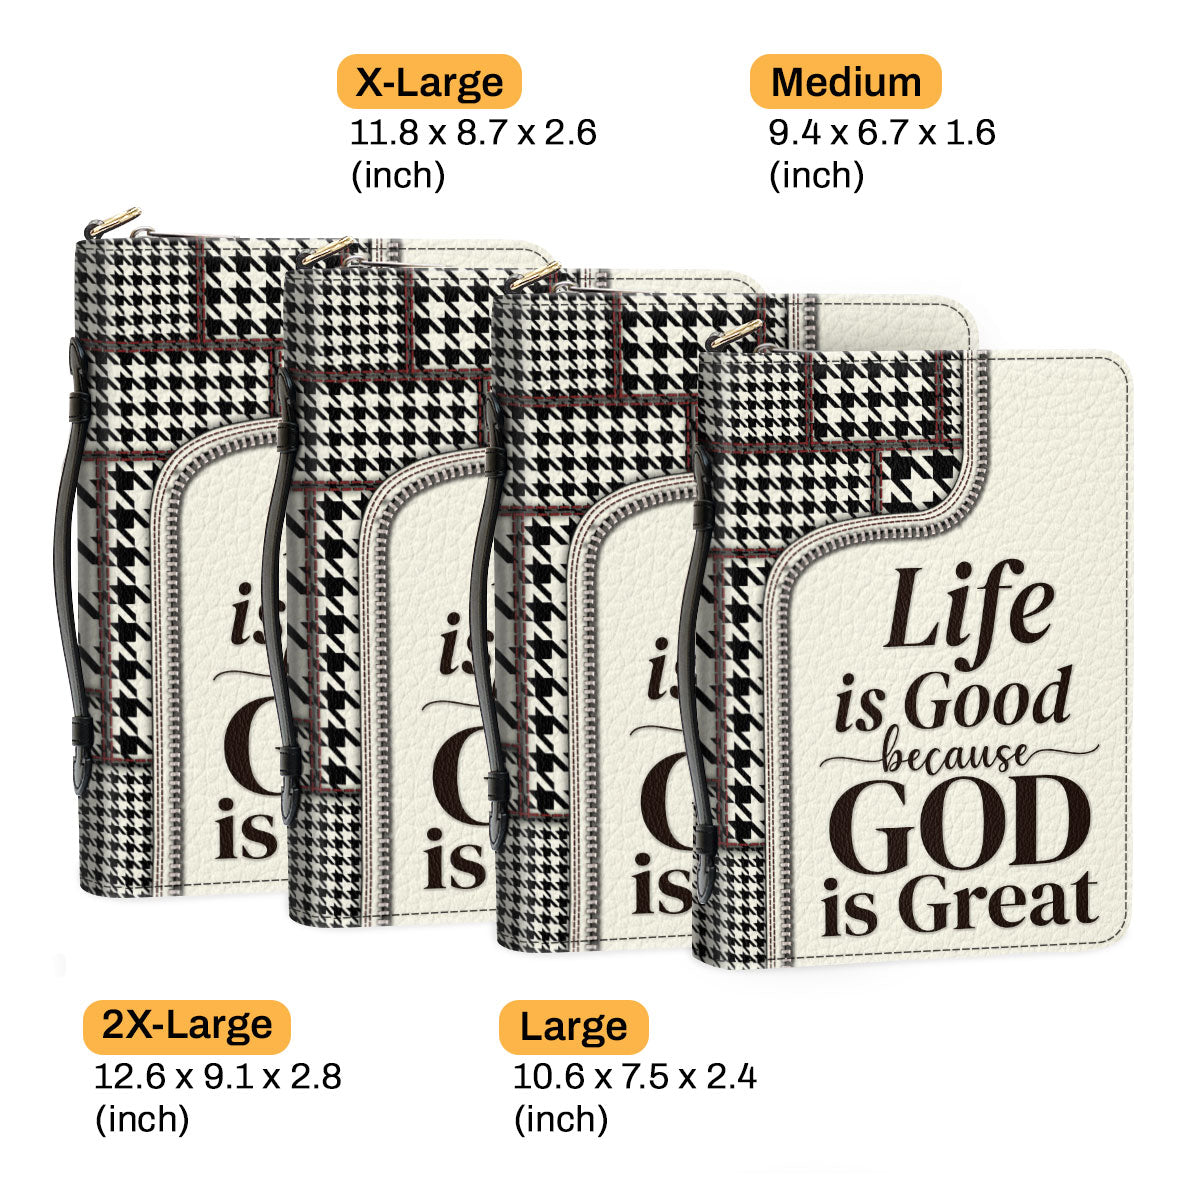 Life Is Good Because God Is Great - Beautiful Personalized Bible Cover HIHN274